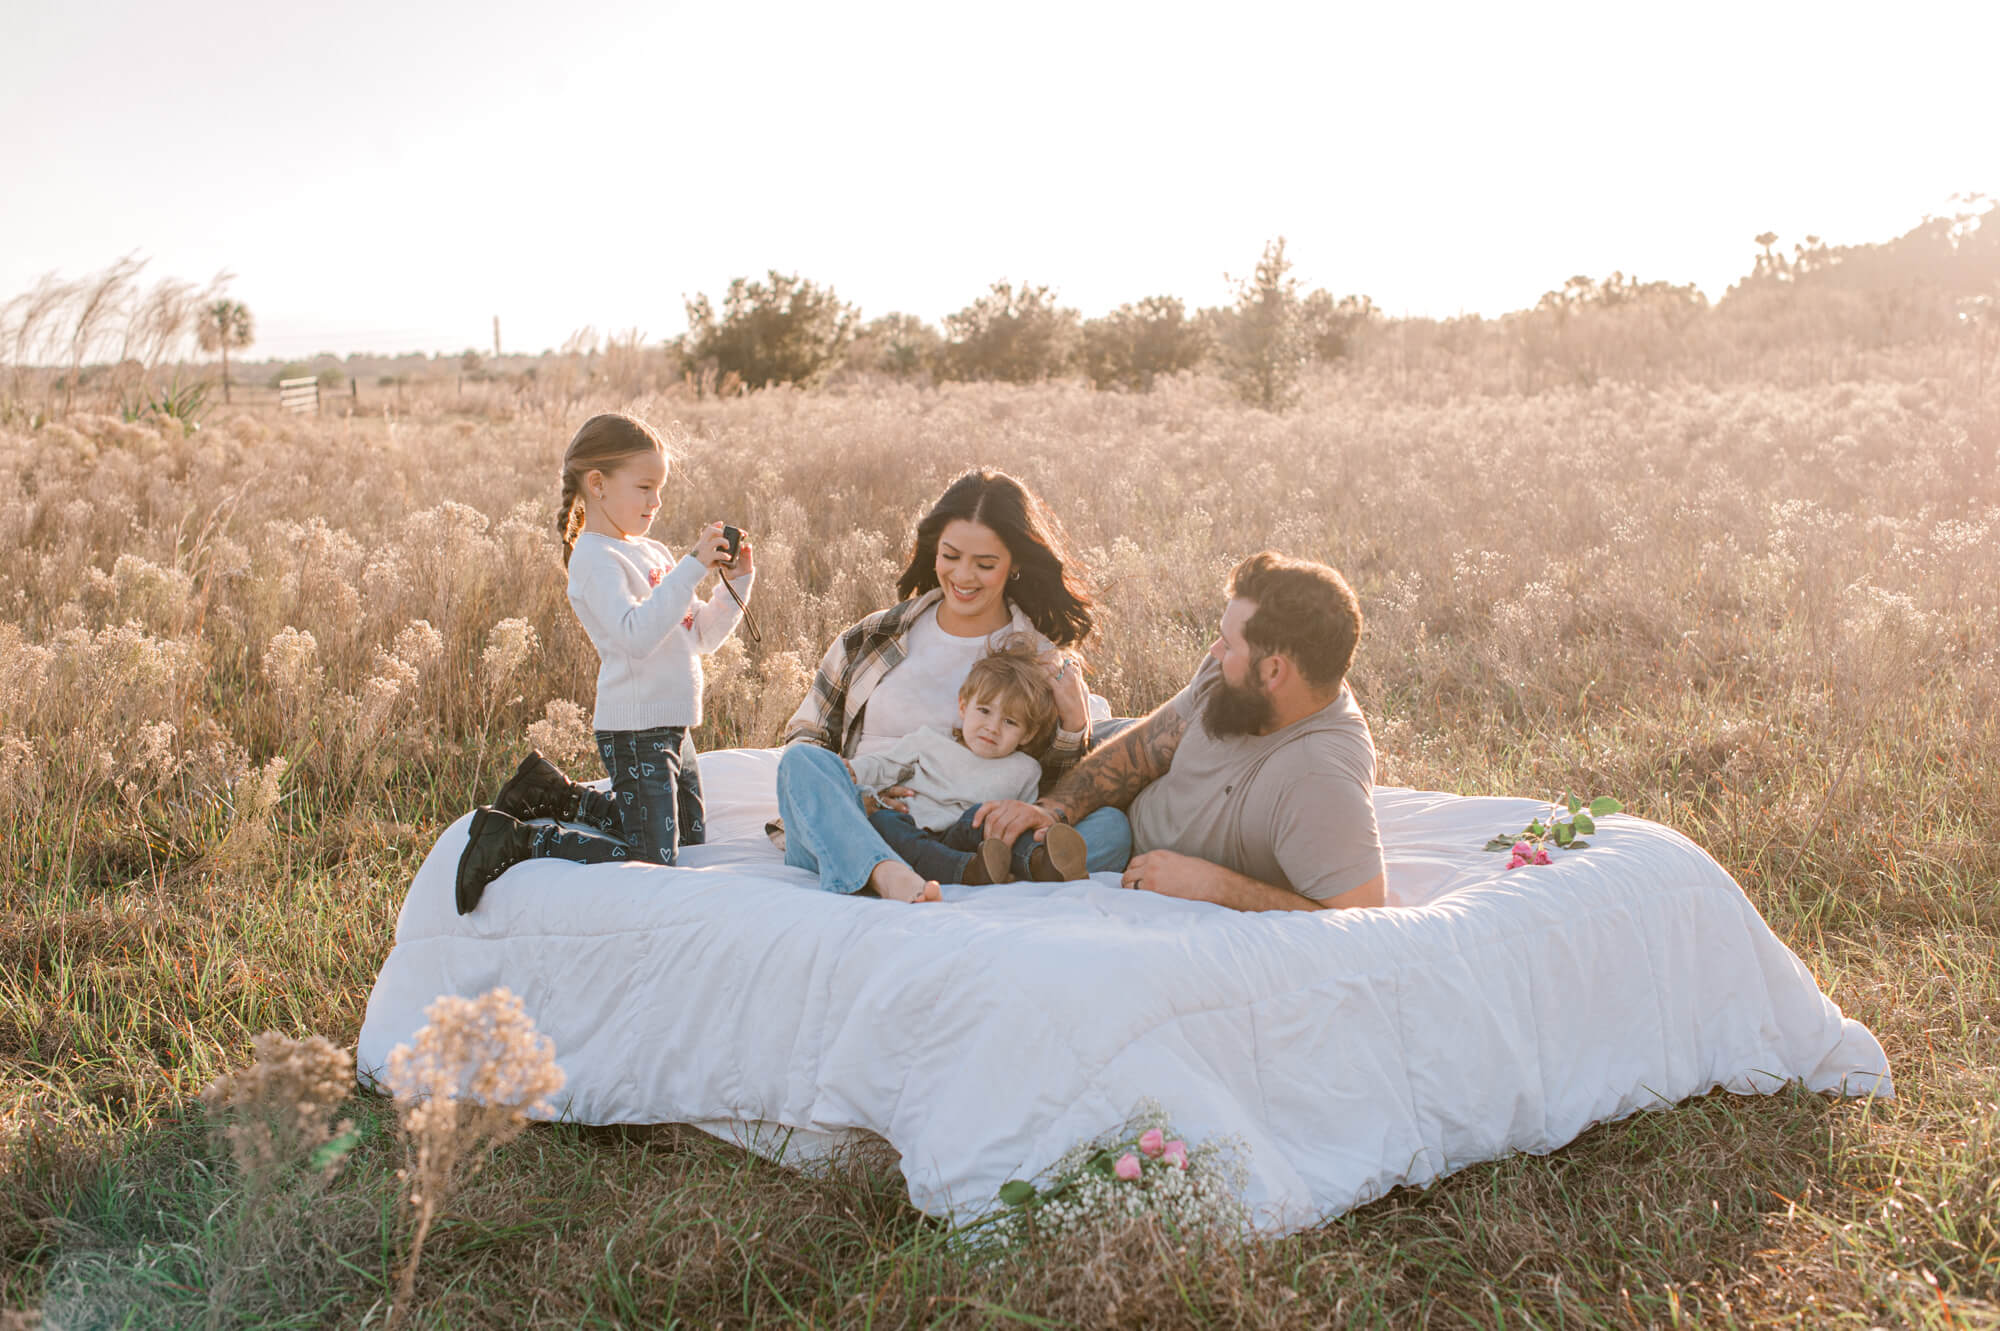 Pearl Pediatric Dental would be a perfect fit for this family of four sitting on an air mattress in a beautiful field at golden hour.